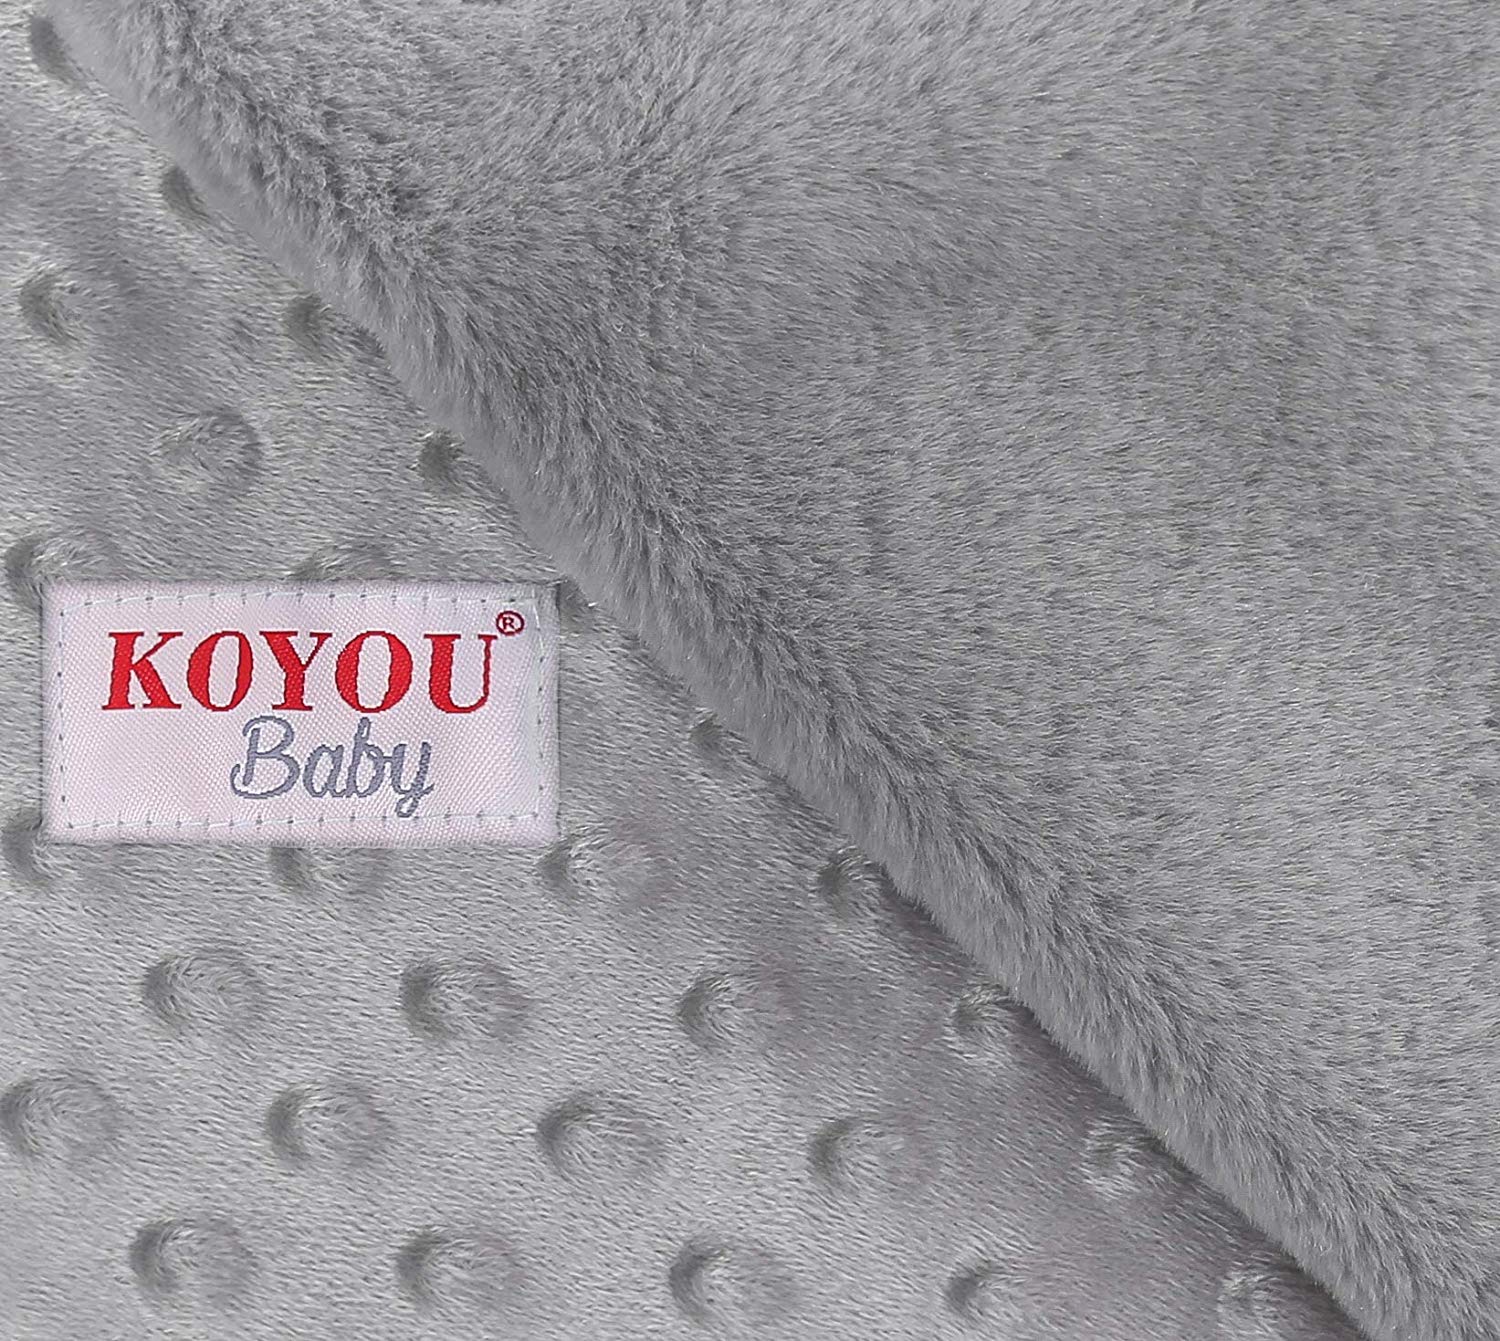 KOYOU BABY - Soft Plush Mink Baby Blanket with Dotted Backing and Silky Trim (30 X 35) - image 3 of 3